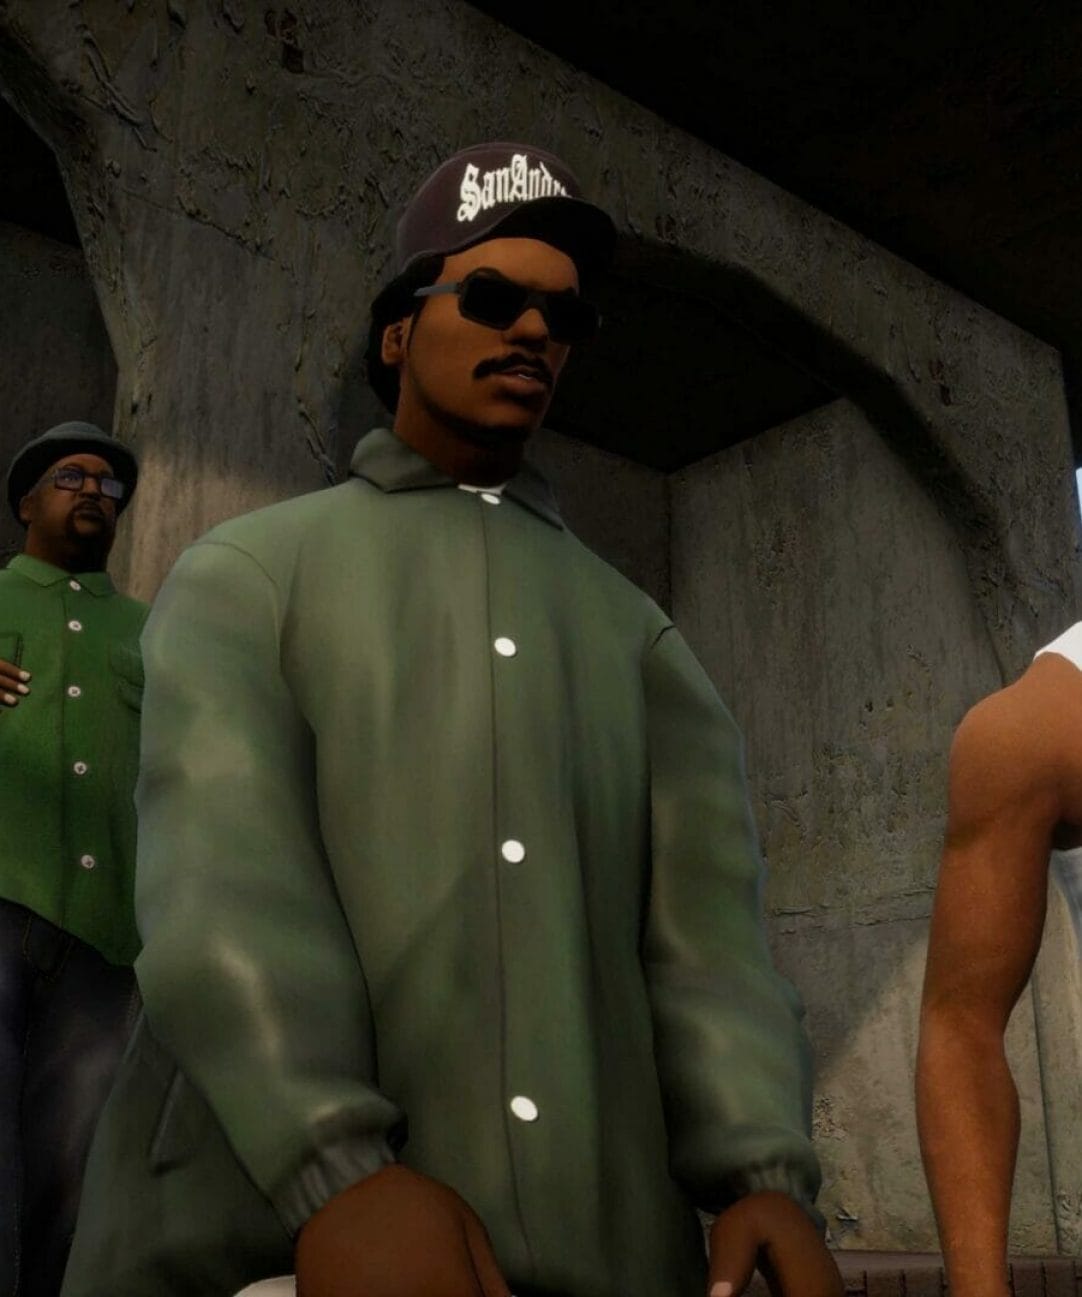 5 reasons why GTA San Andreas multiplayer is still popular in 2021